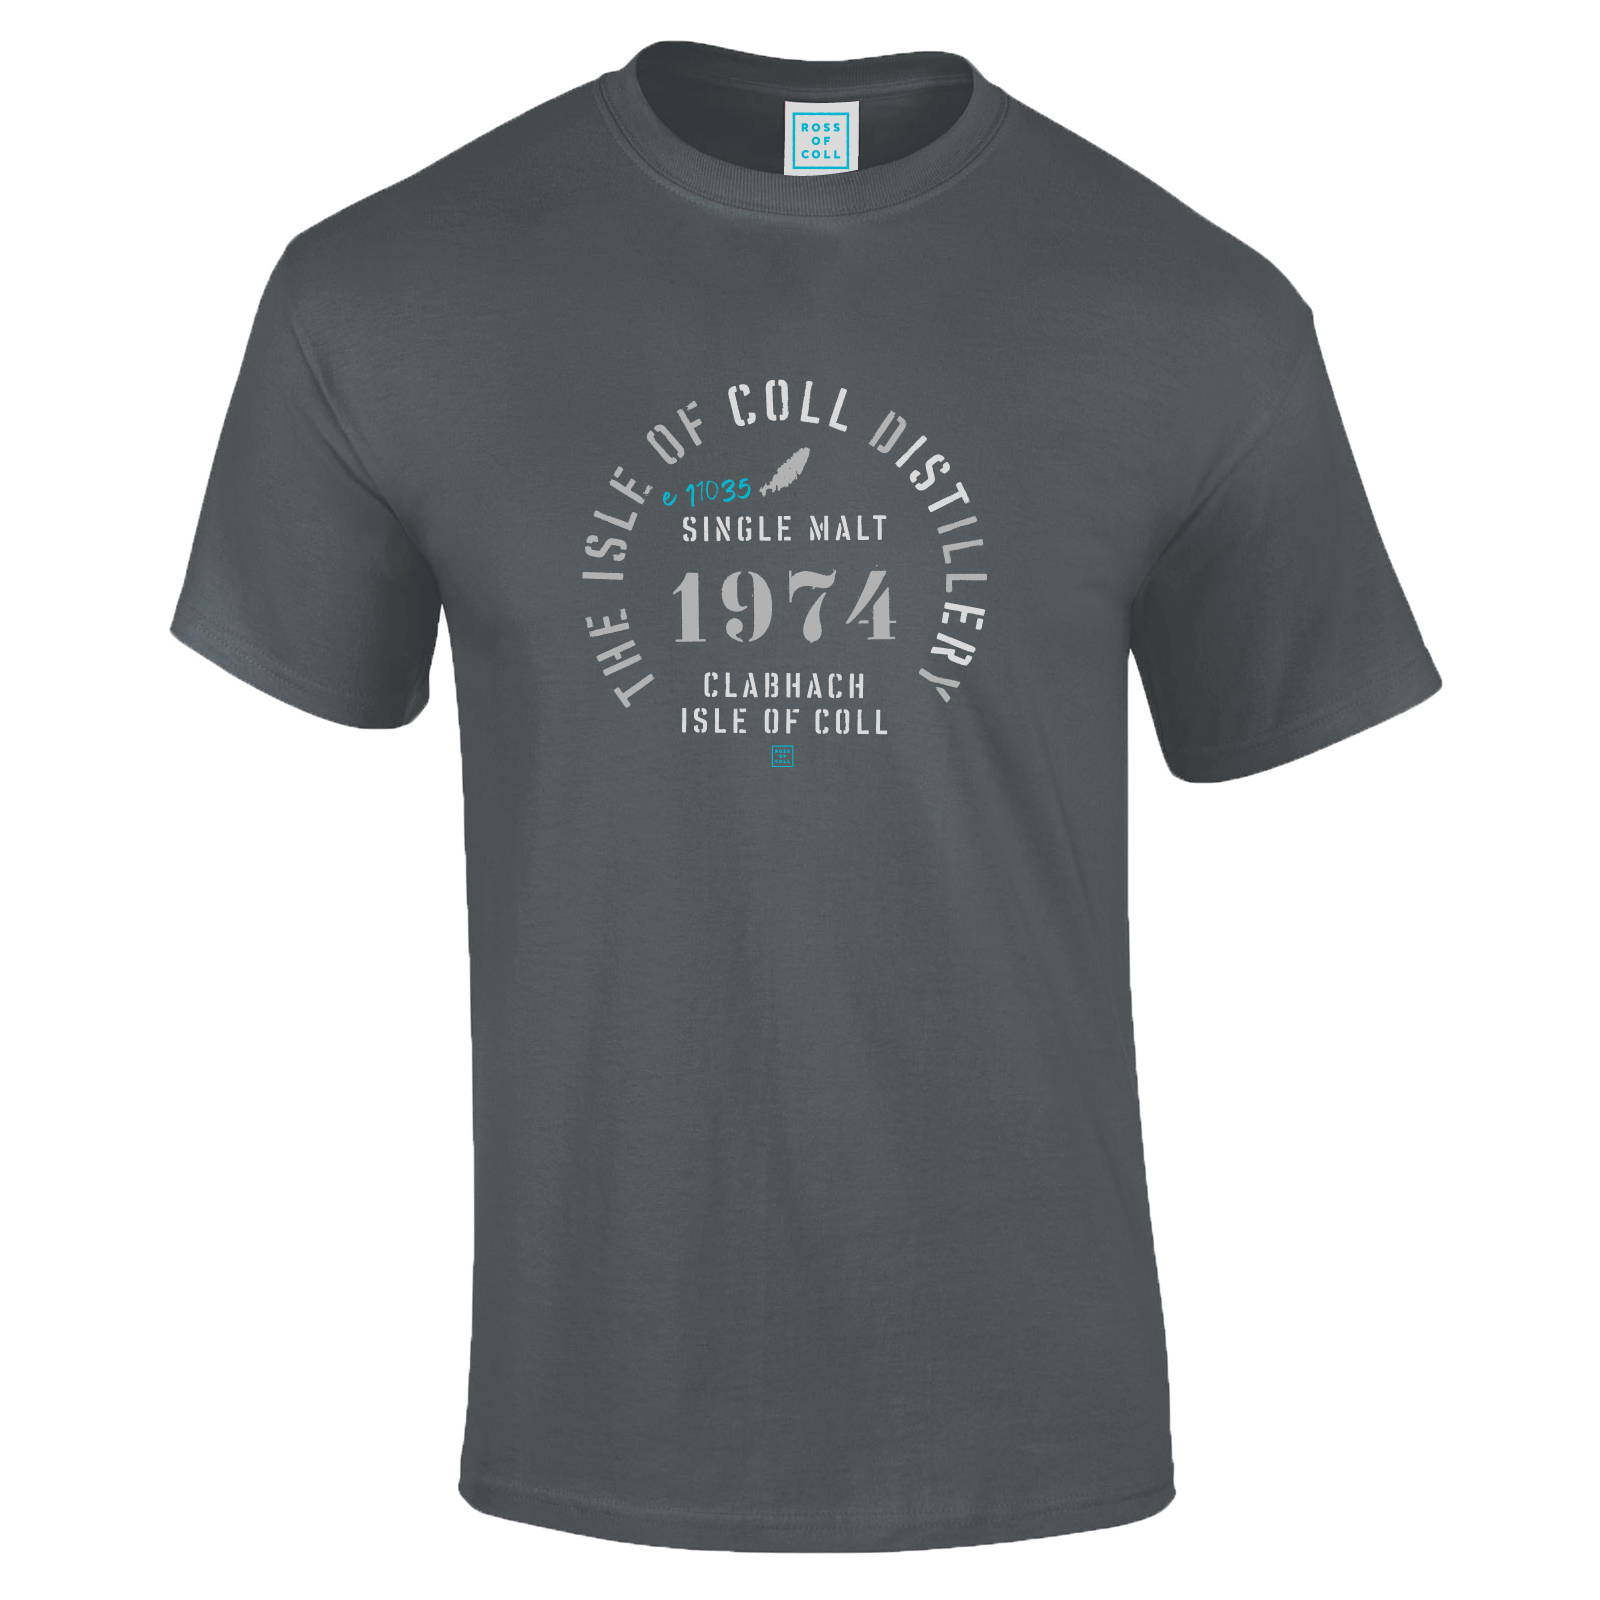 Coll Distillery Tee - Ross of Coll